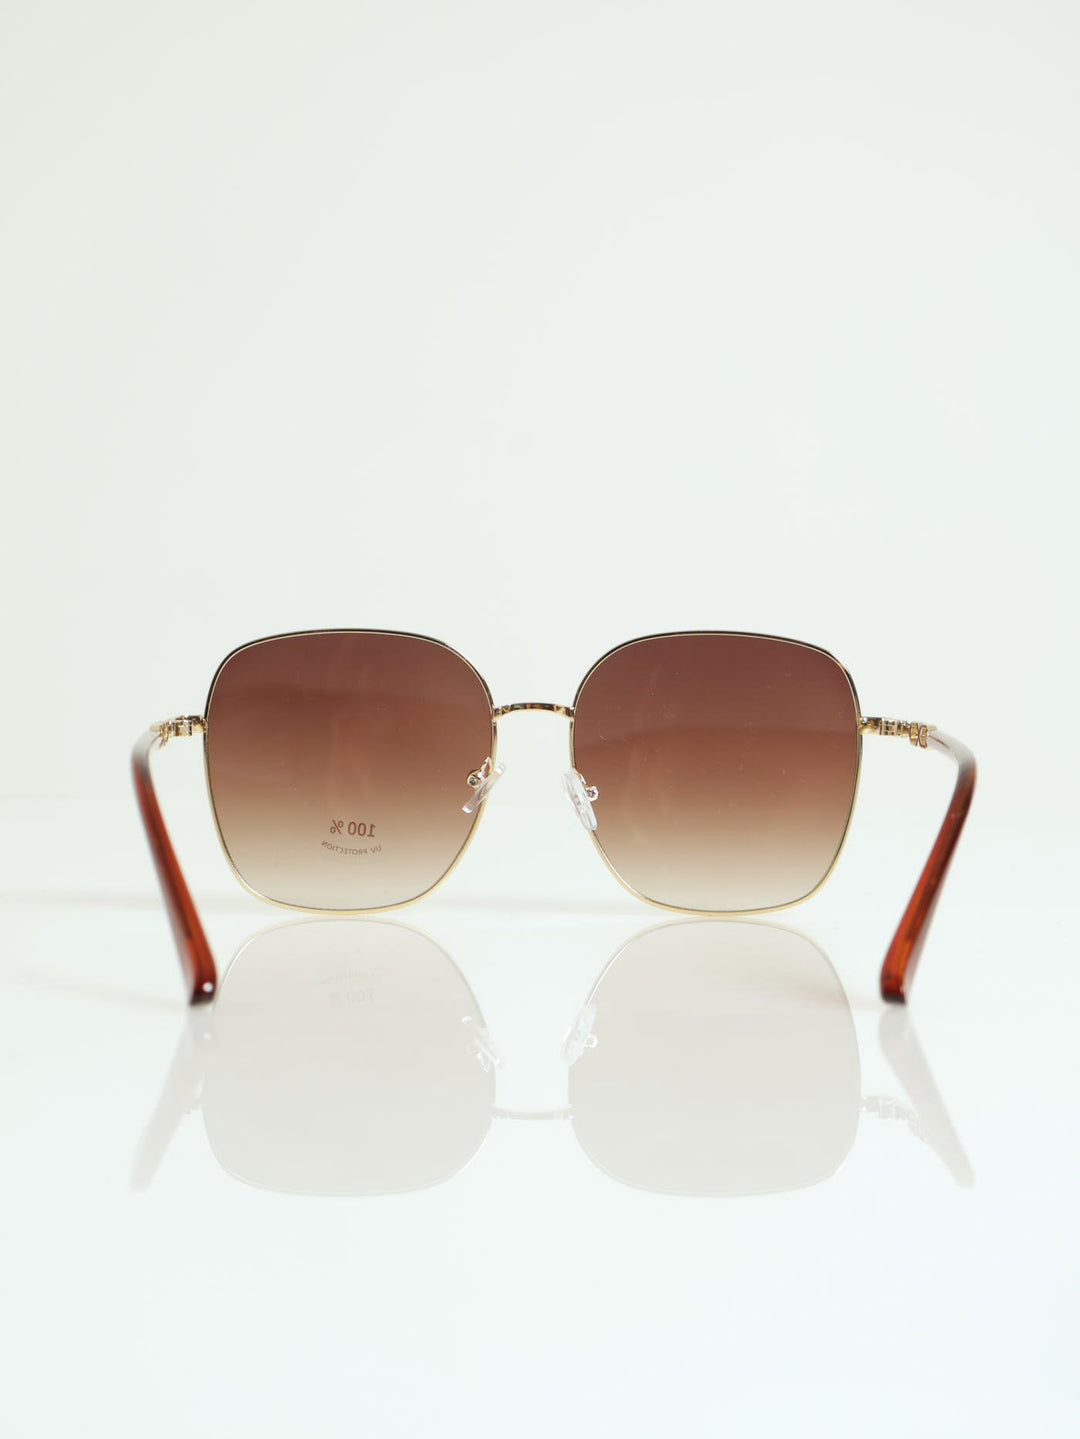 Shiny Metal Frame Sunglasses With Gradient Lens - Gold